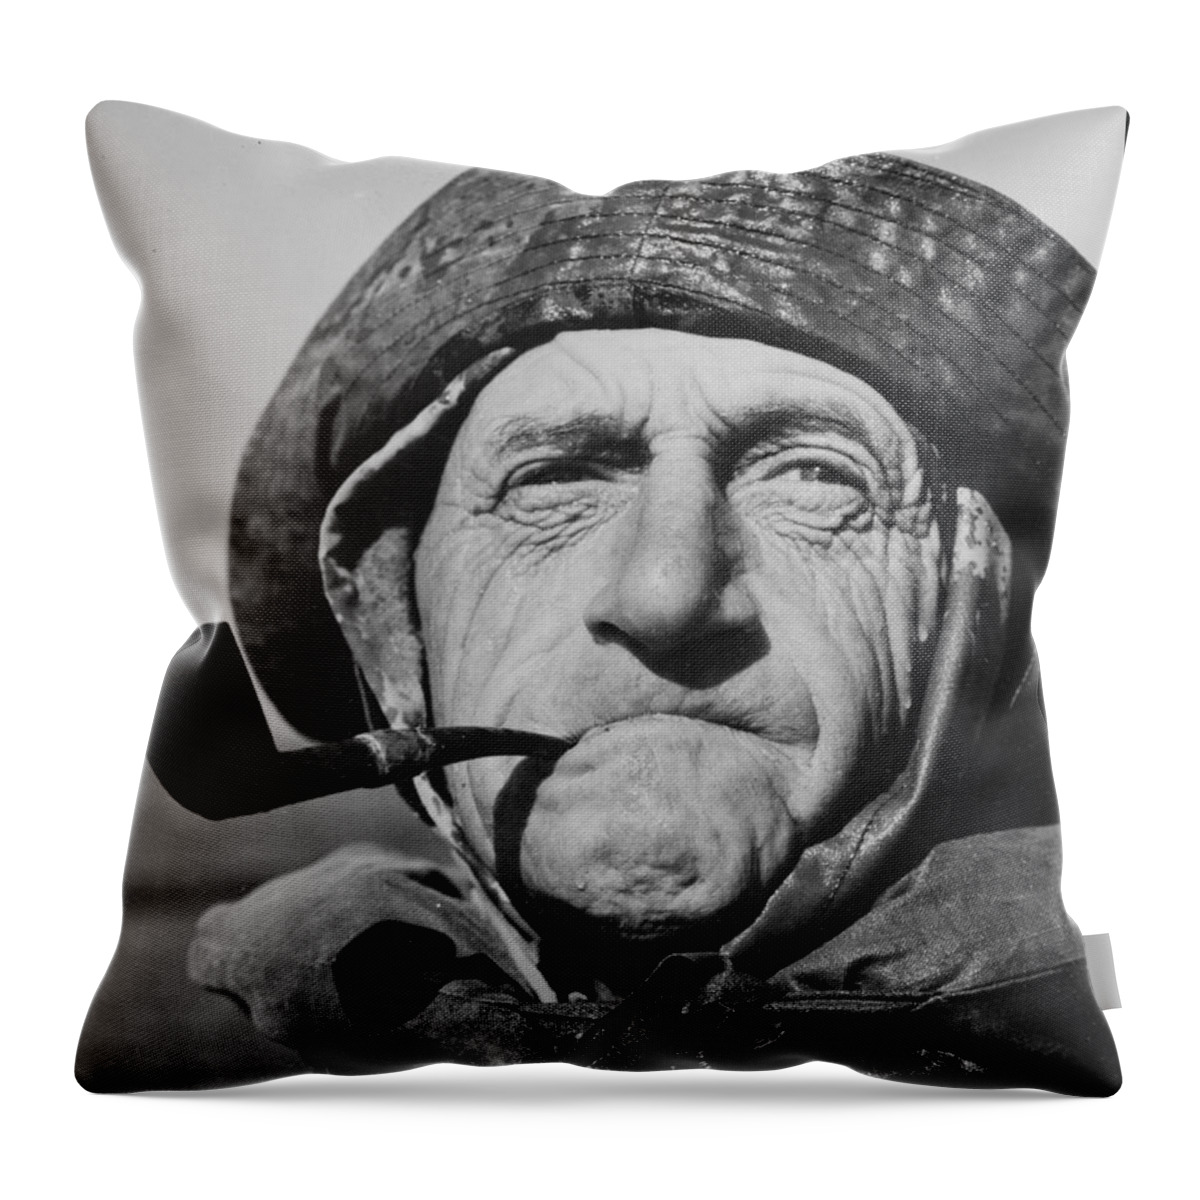 Old Salt 1943 Throw Pillow featuring the photograph Old Salt 1943 by Padre Art